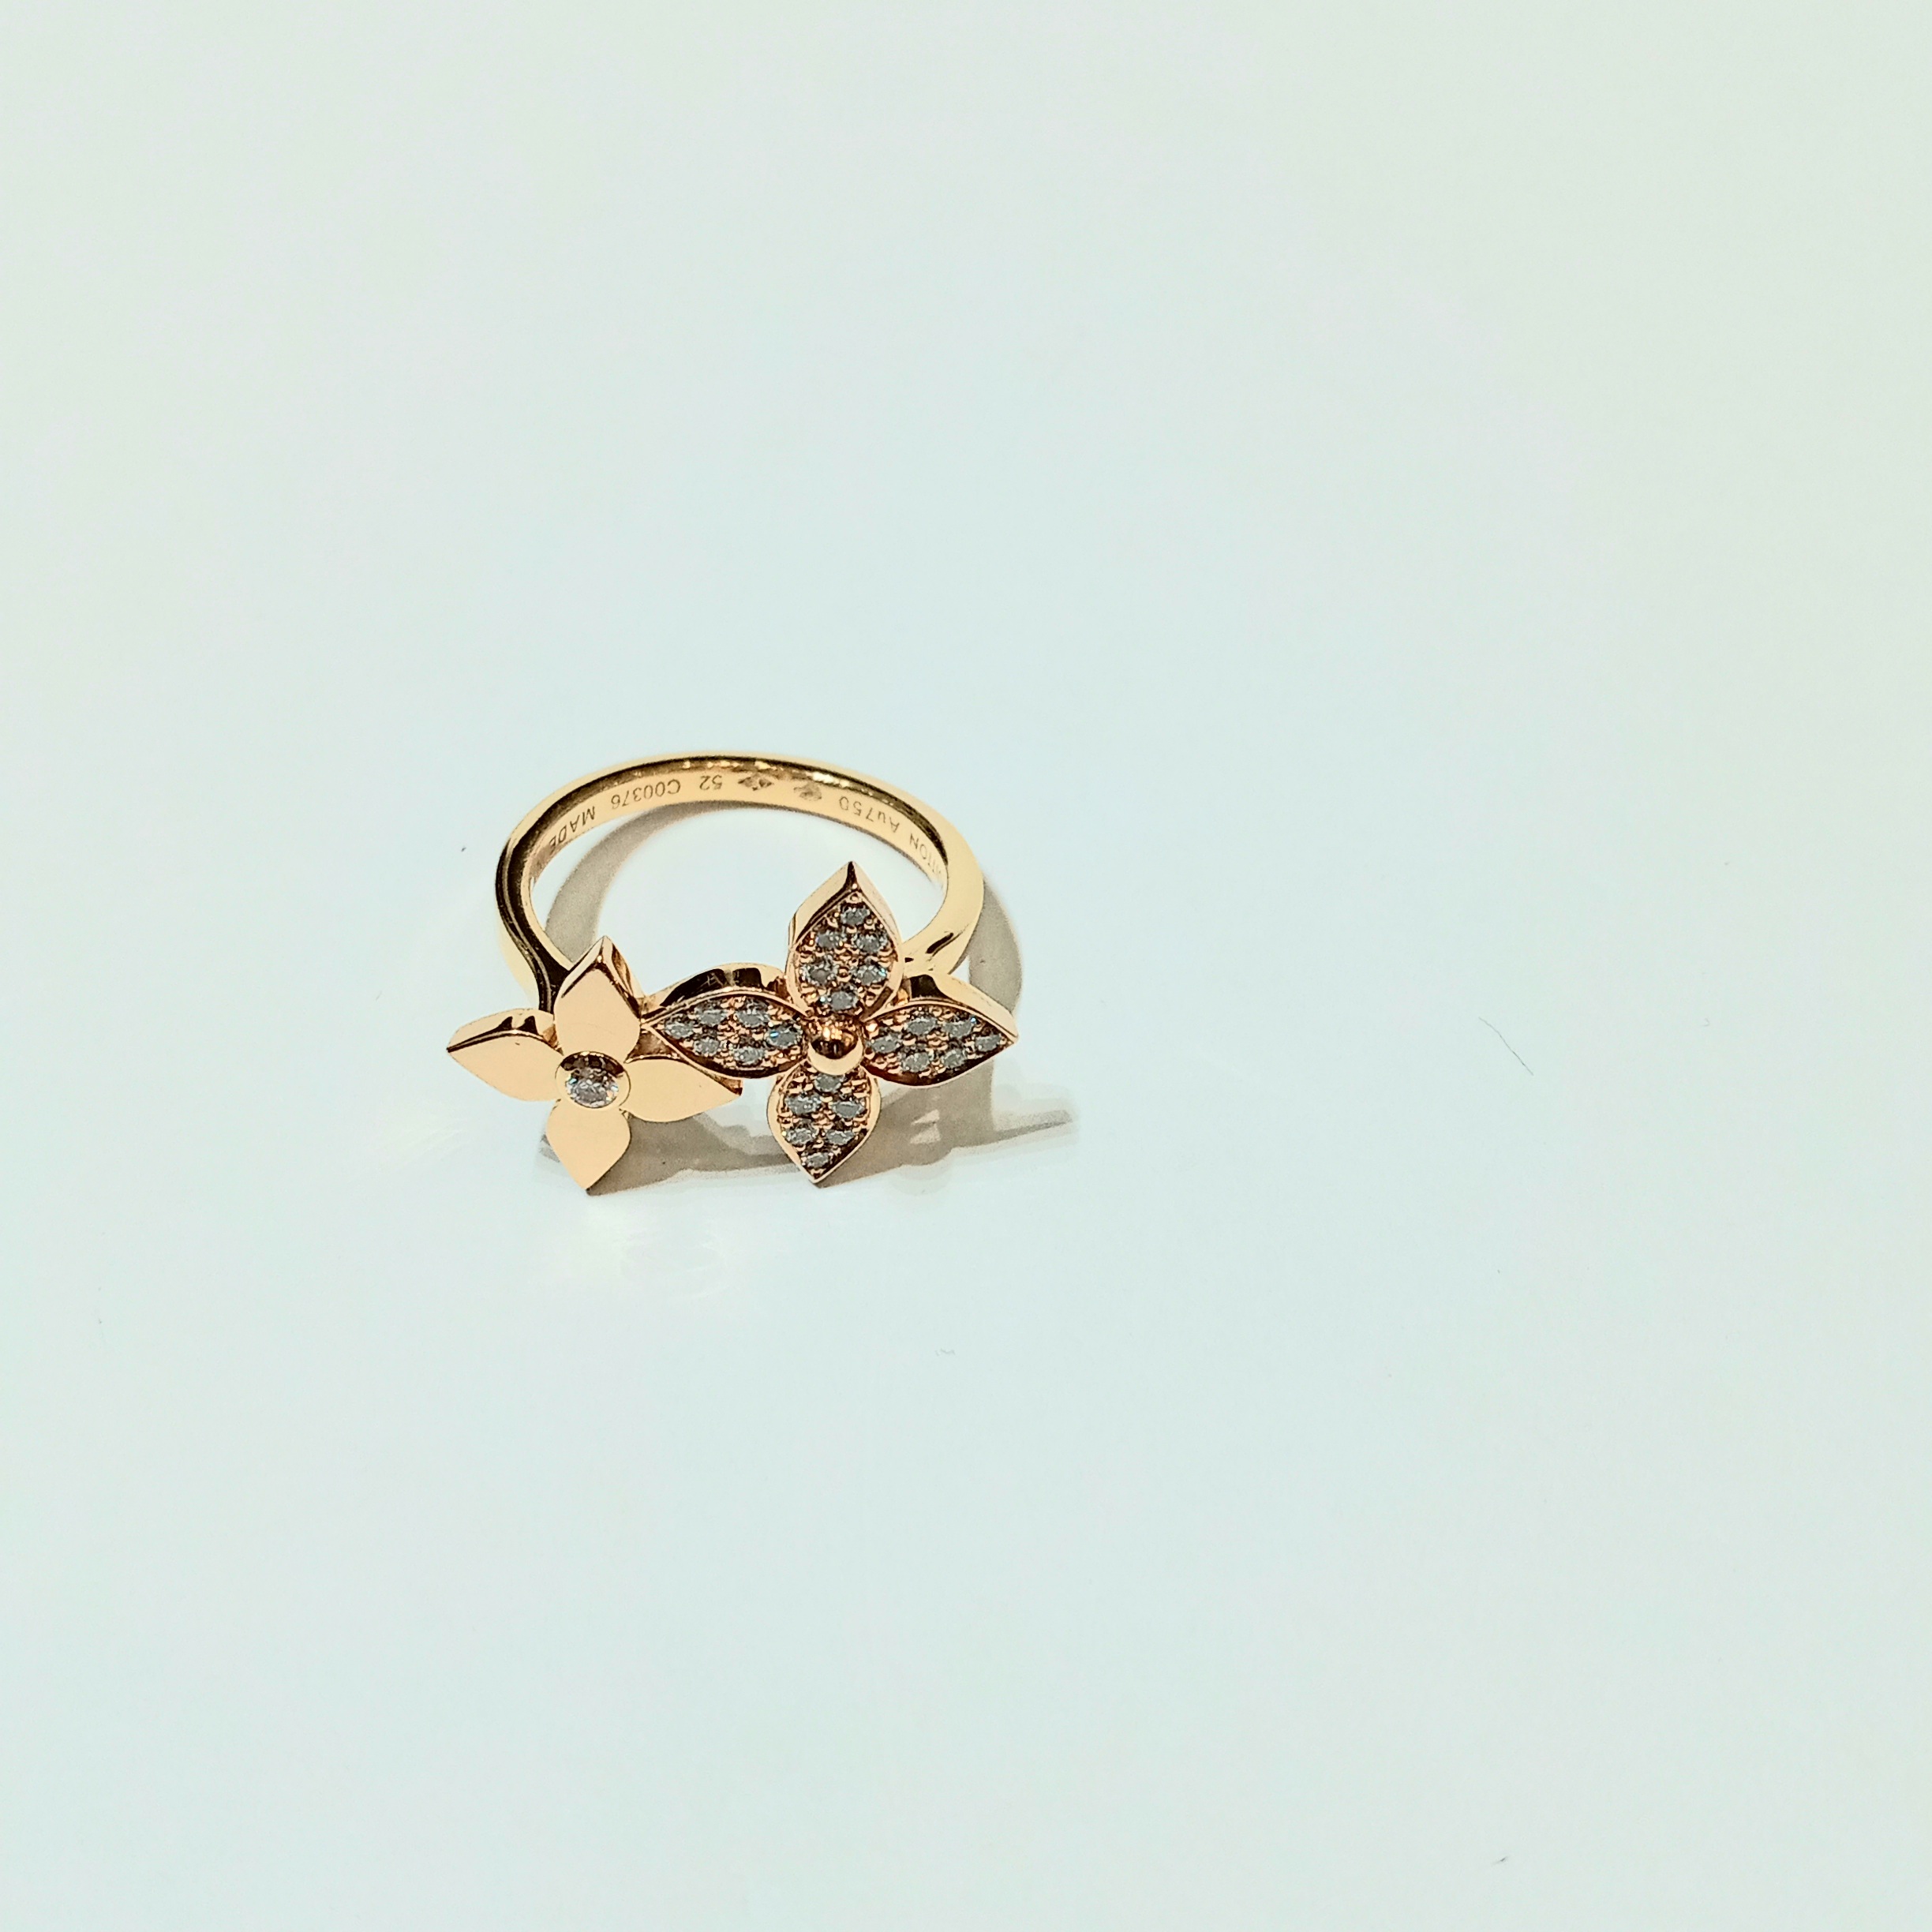 Louis Vuitton Gold Plated Monogram Ring - $52 New With Tags - From